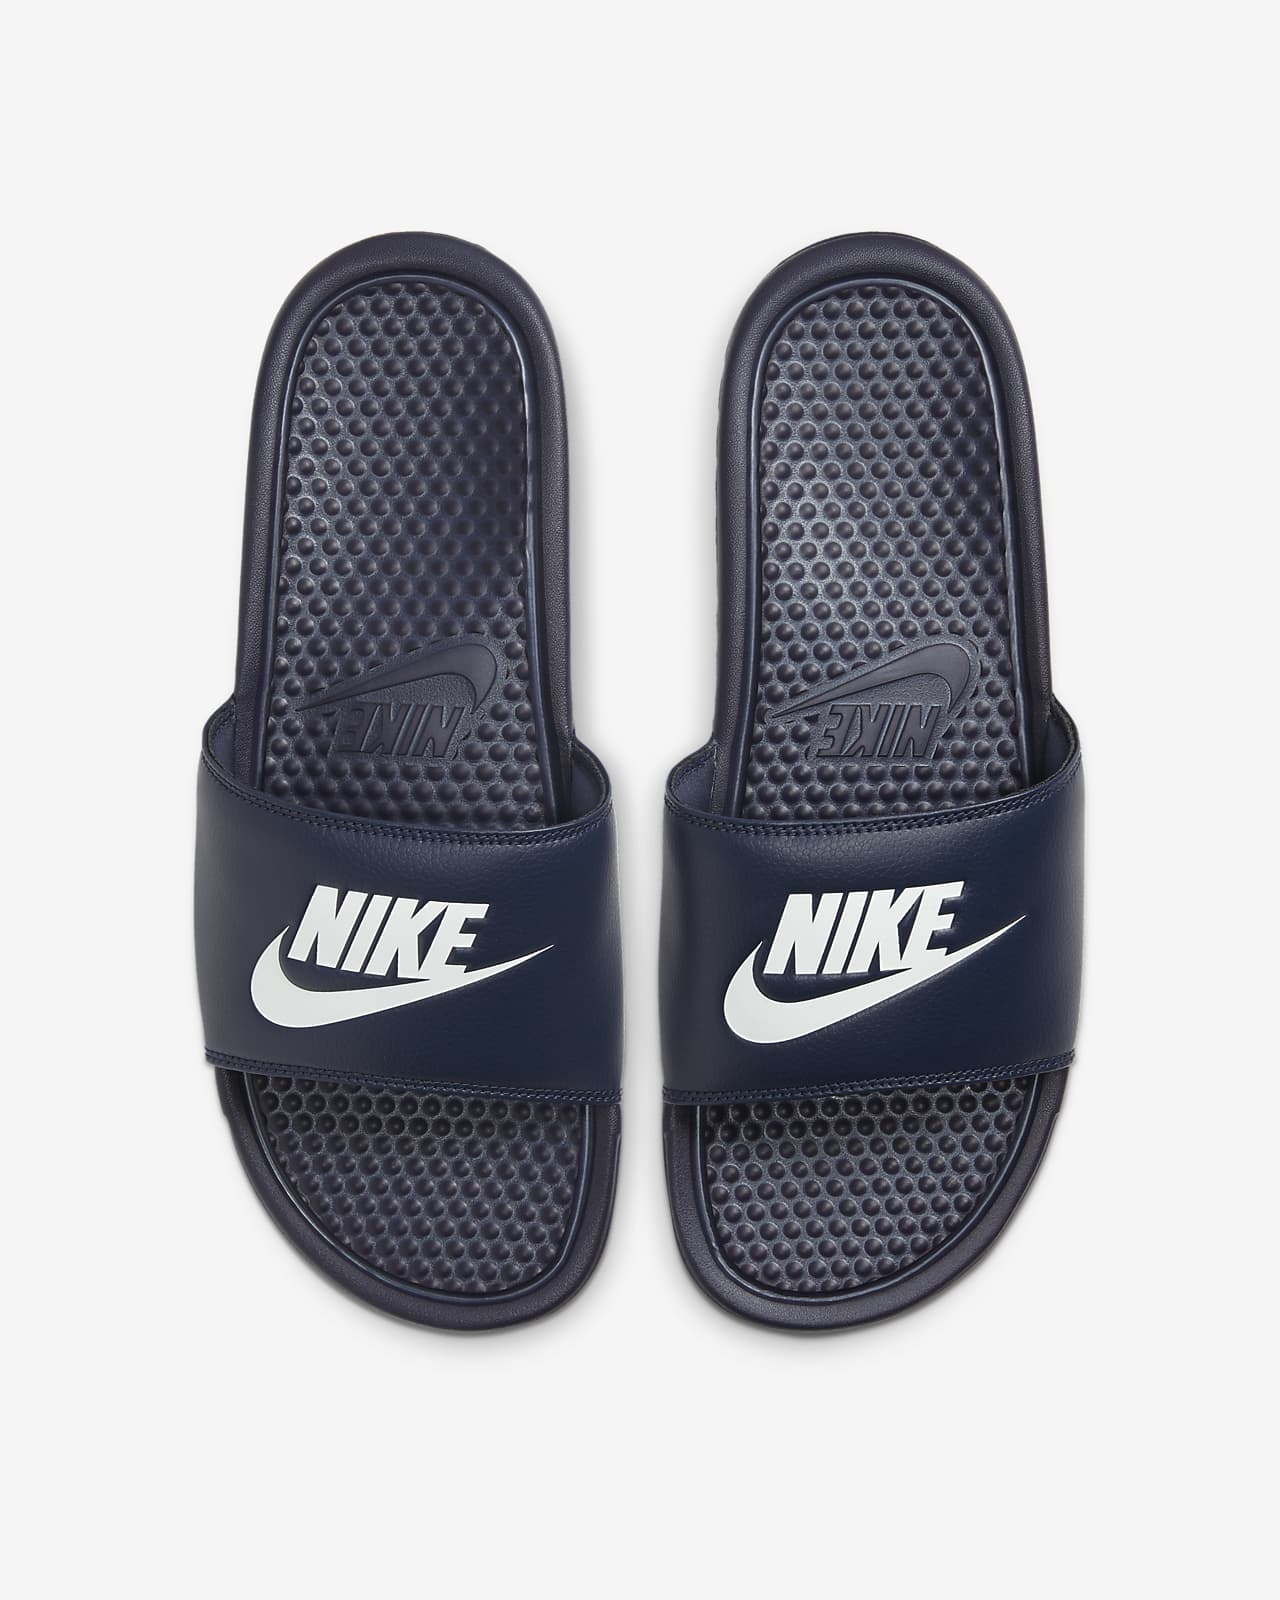 size 15 nike sandals